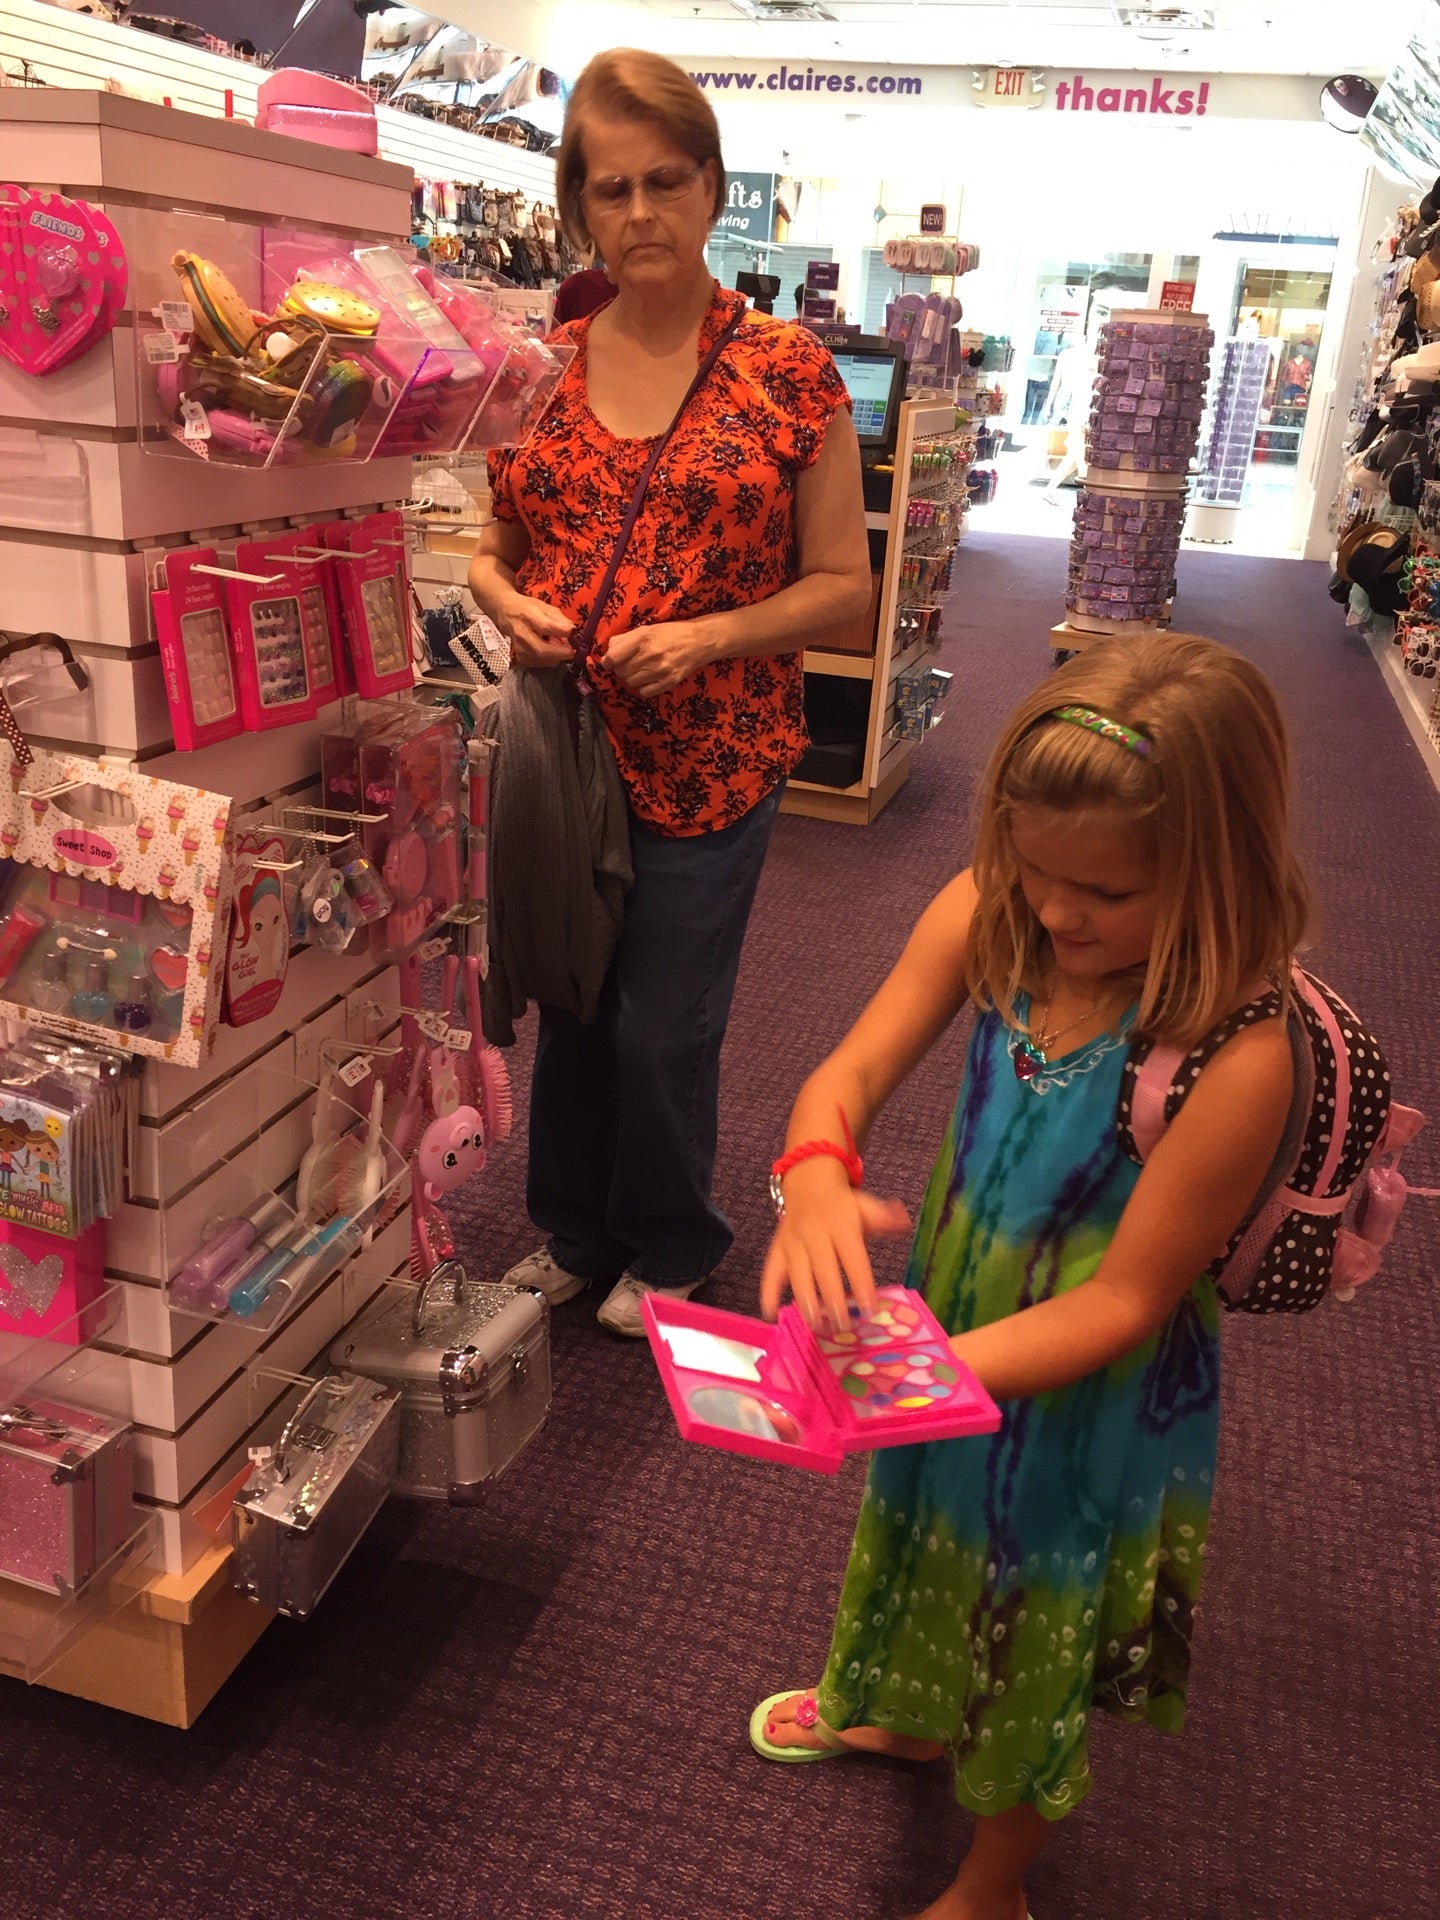  Claires Accessories For Girls